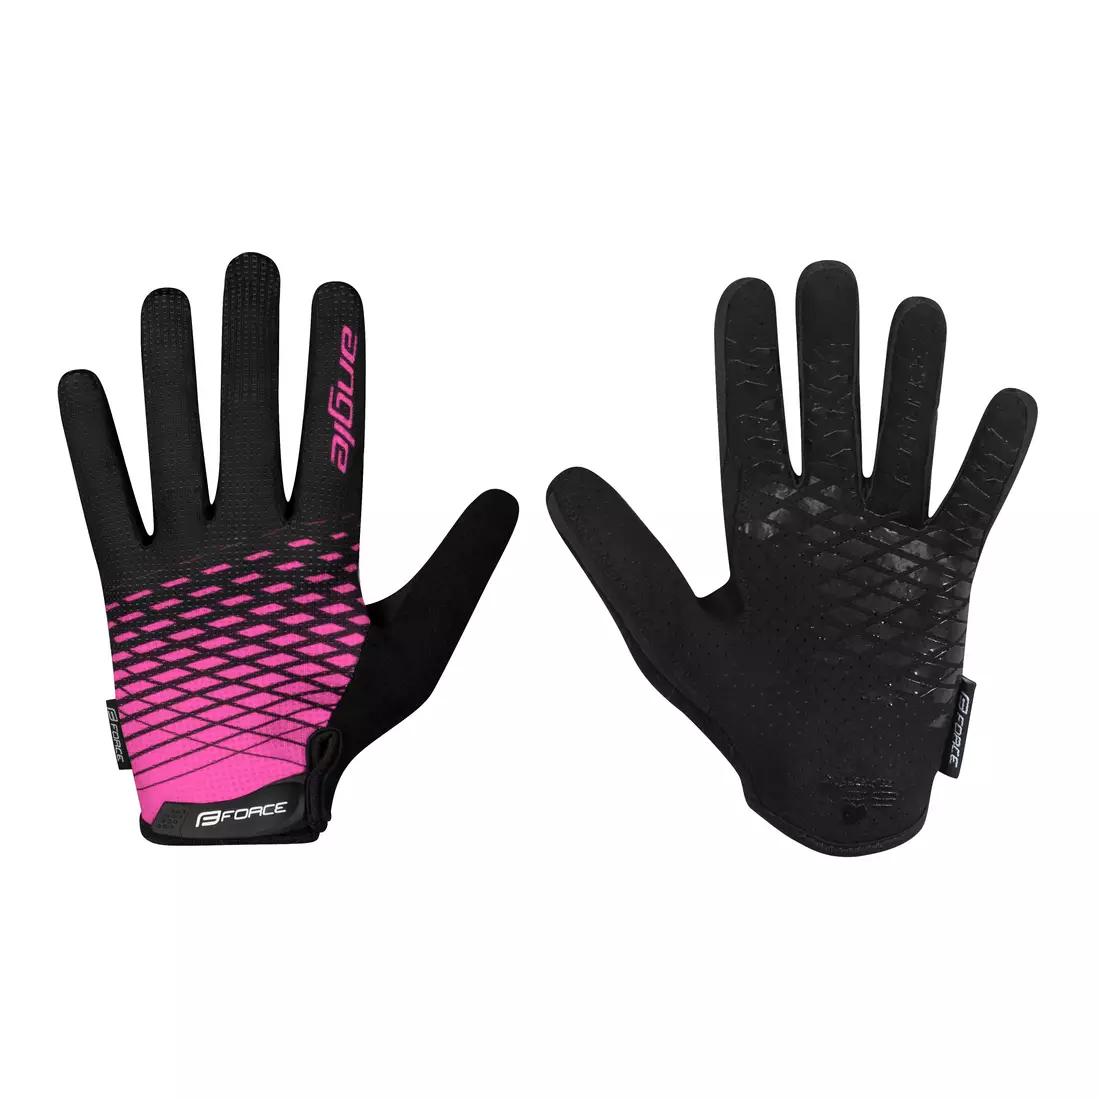 FORCE Women's cycling gloves MTB ANGLE, pink and black 905723